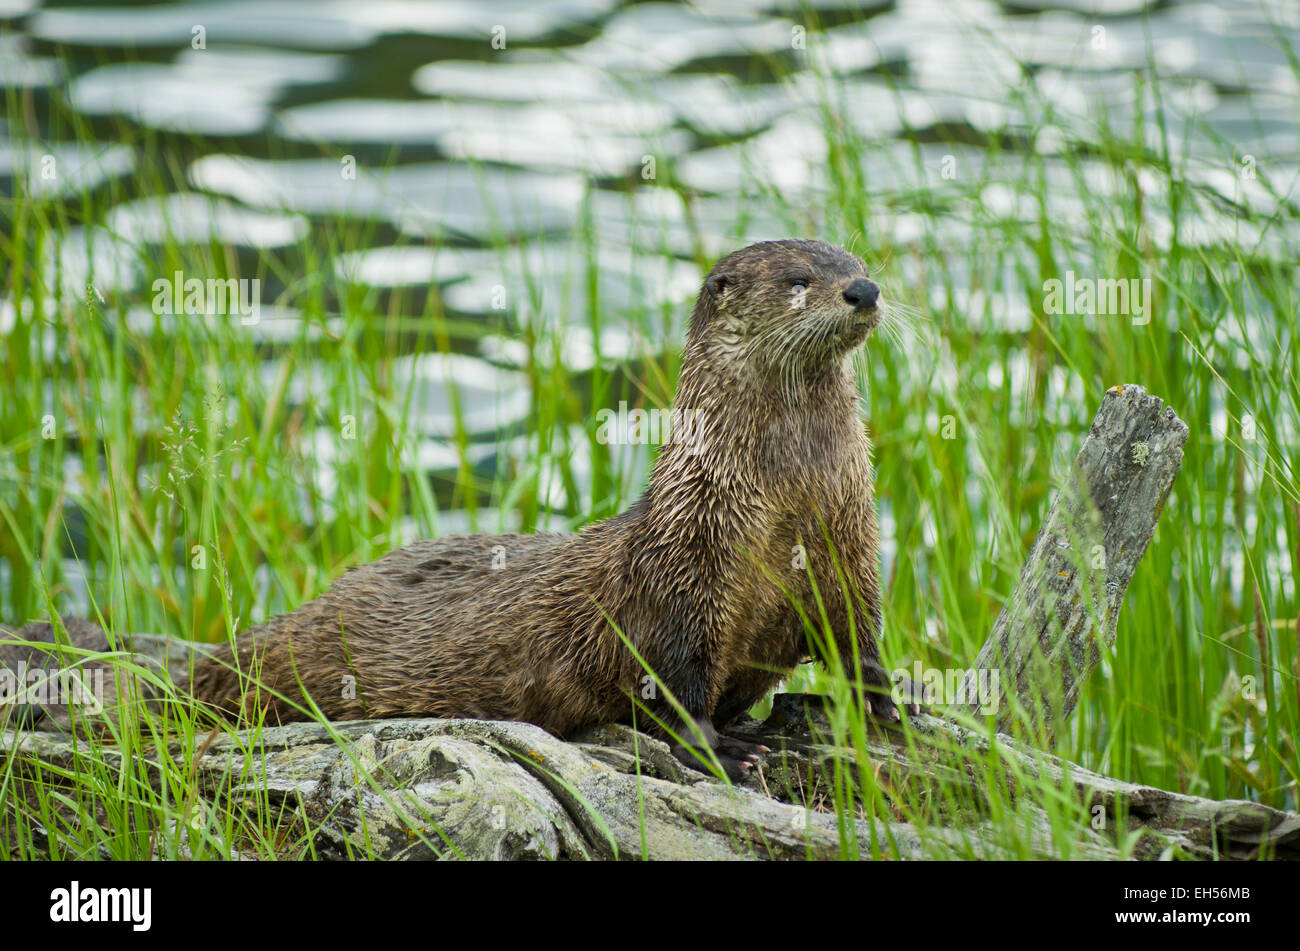 River otter sitting on a log by Trout Lake, Yellowstone National Park, Wyoming, United States. Stock Photo